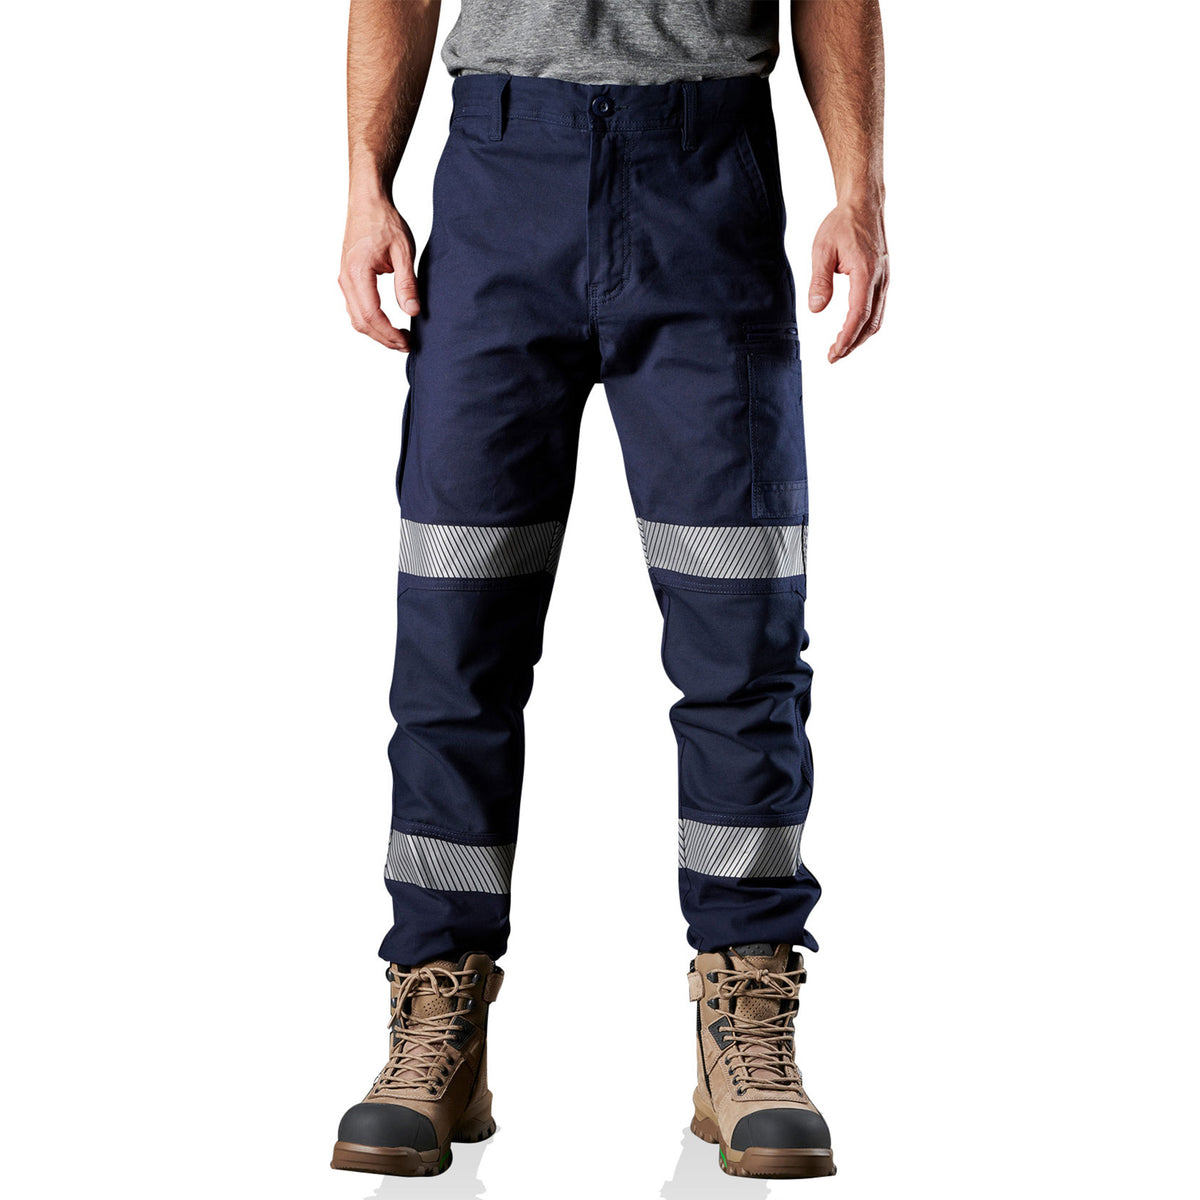 fxd reflective stretch work pants in navy